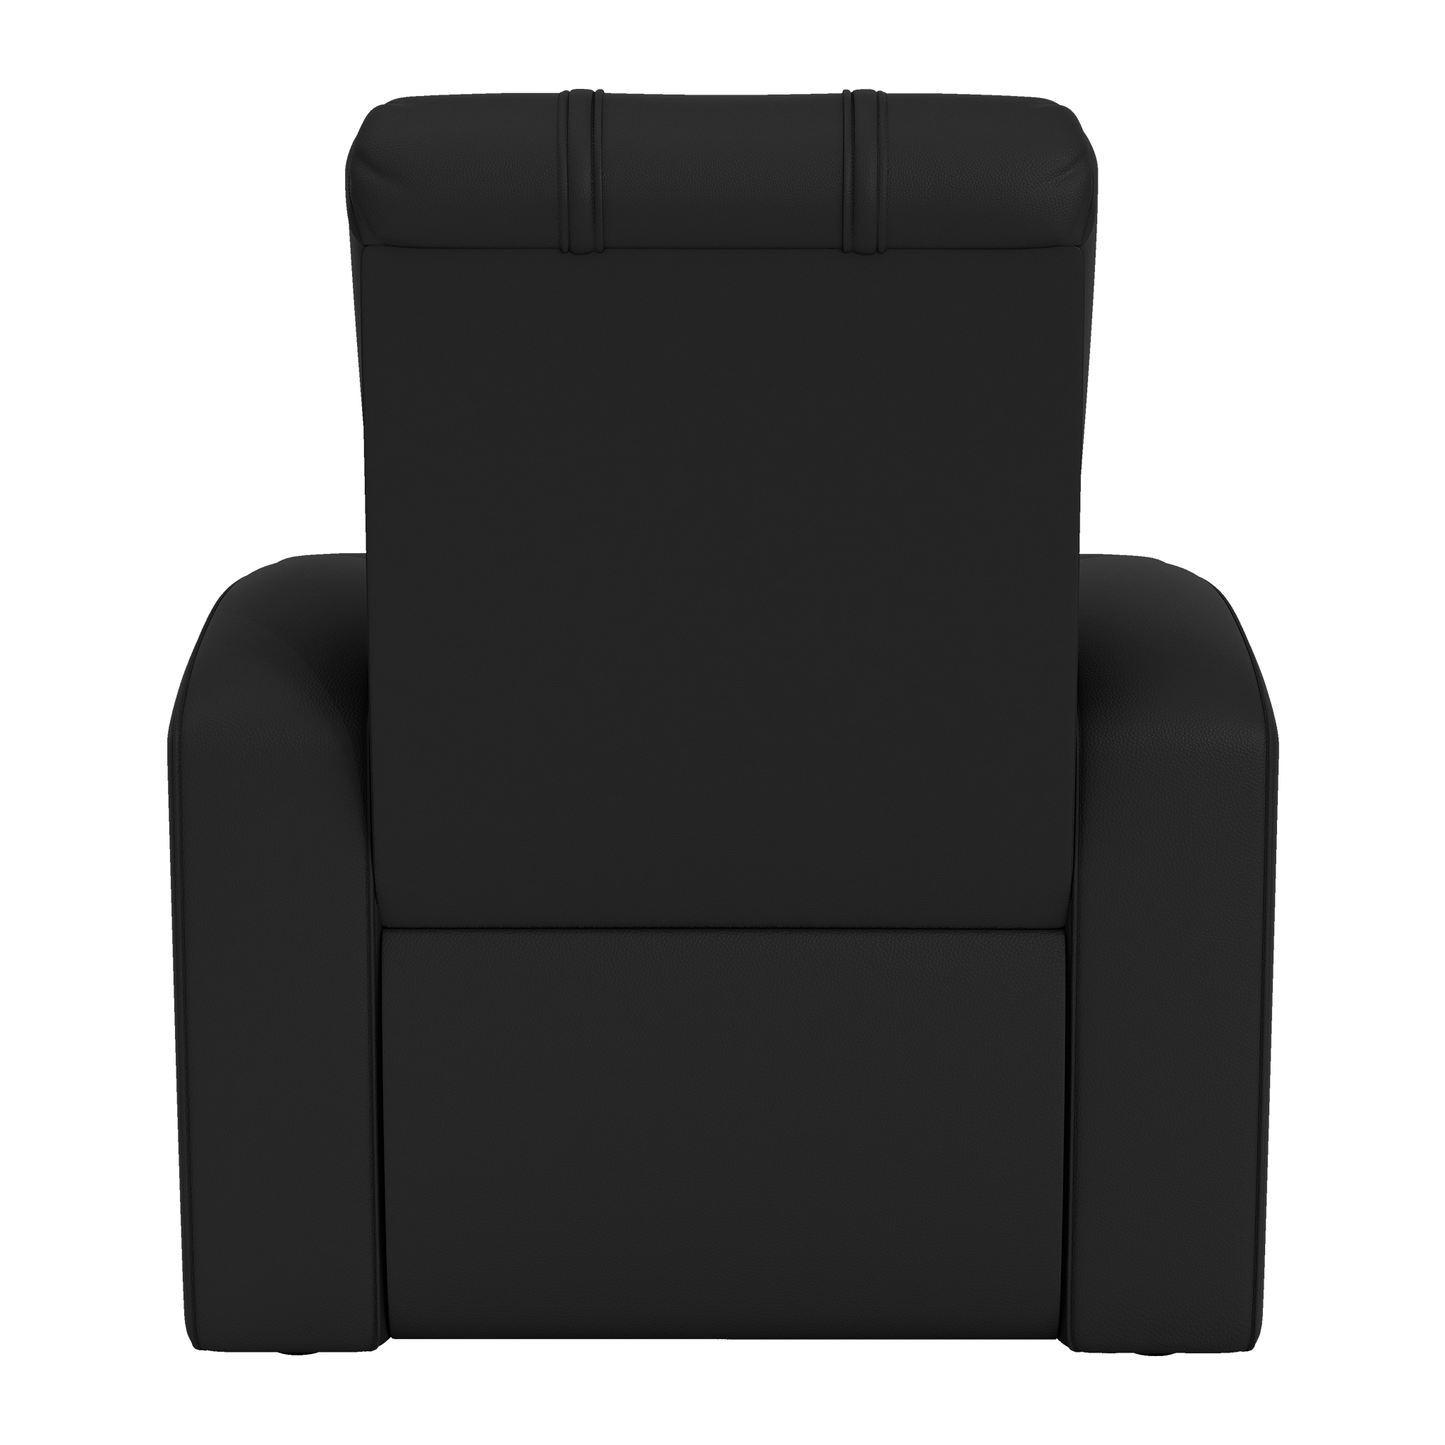 Relax Home Theater Recliner with  New York Giants Primary Logo